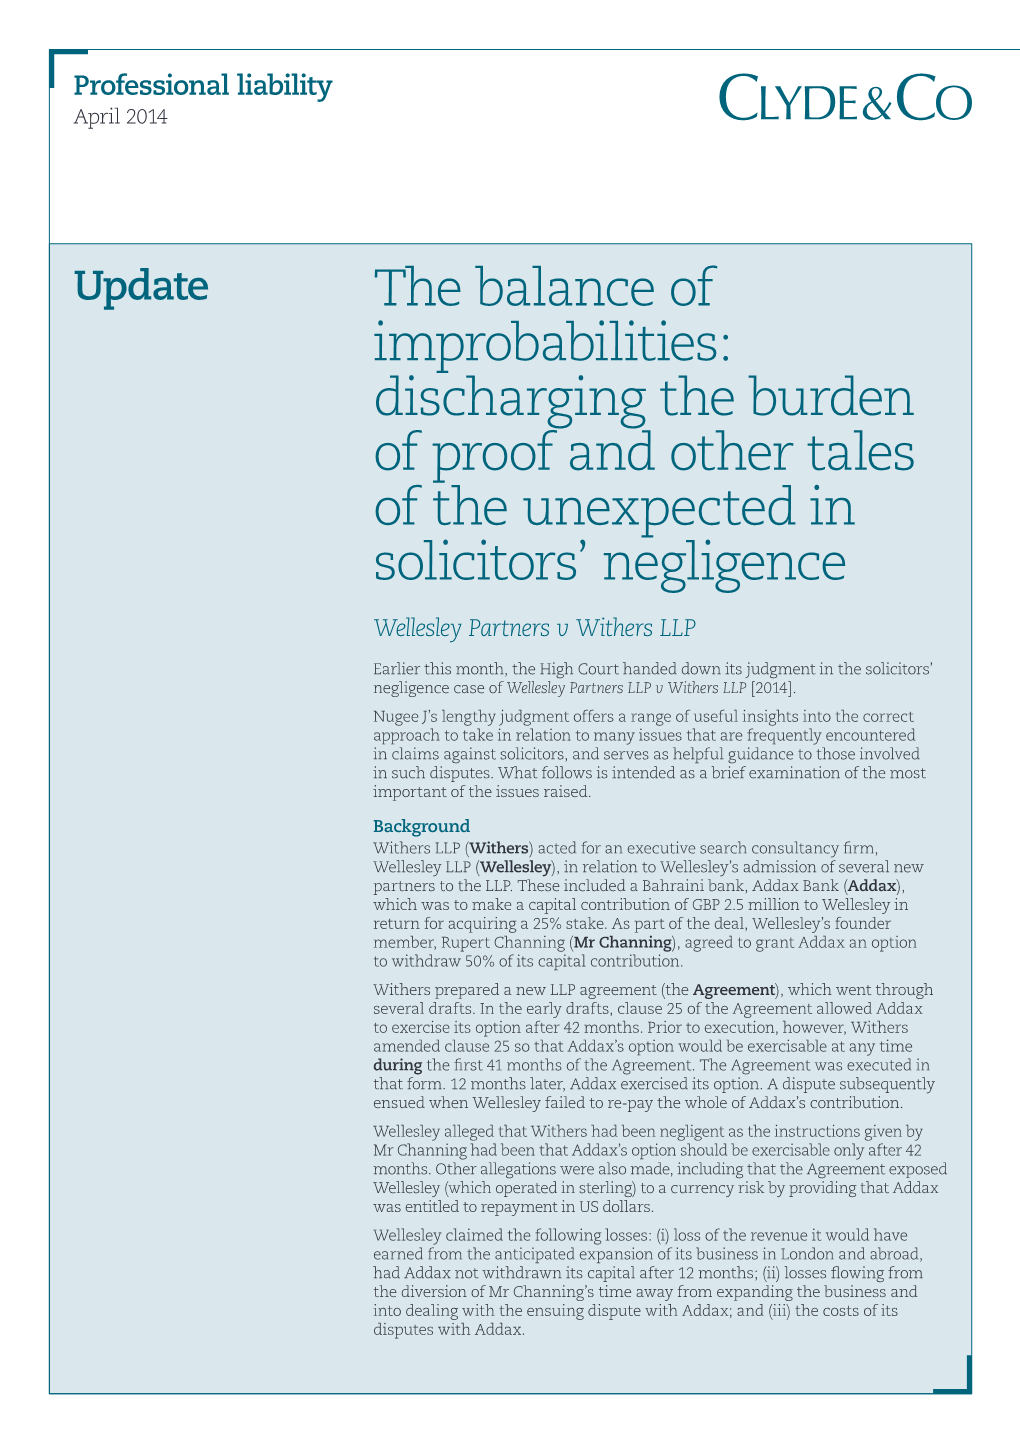 The Balance of Improbabilities: Discharging the Burden of Proof and Other Tales of the Unexpected in Solicitors’ Negligence